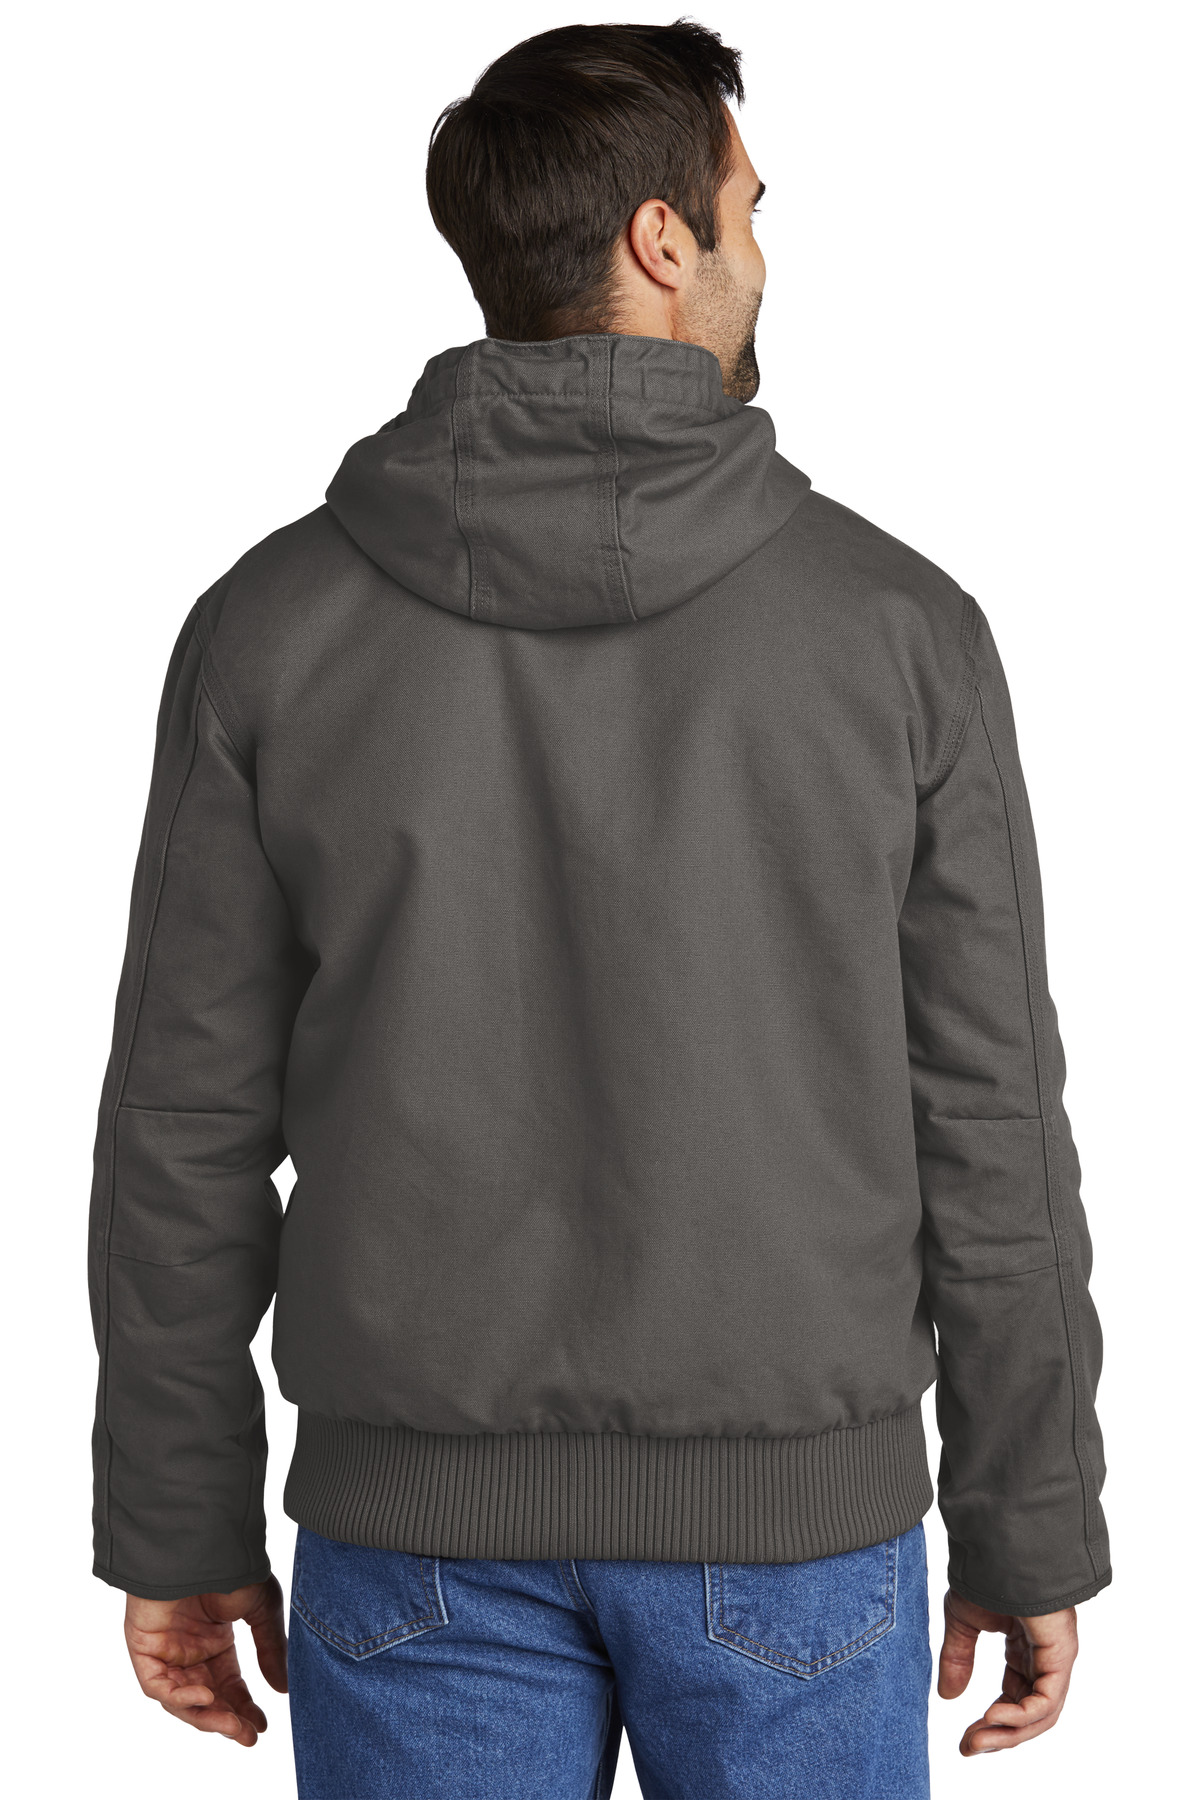 Carhartt Washed Duck Active Jac. CT104050 – in focUS apparel